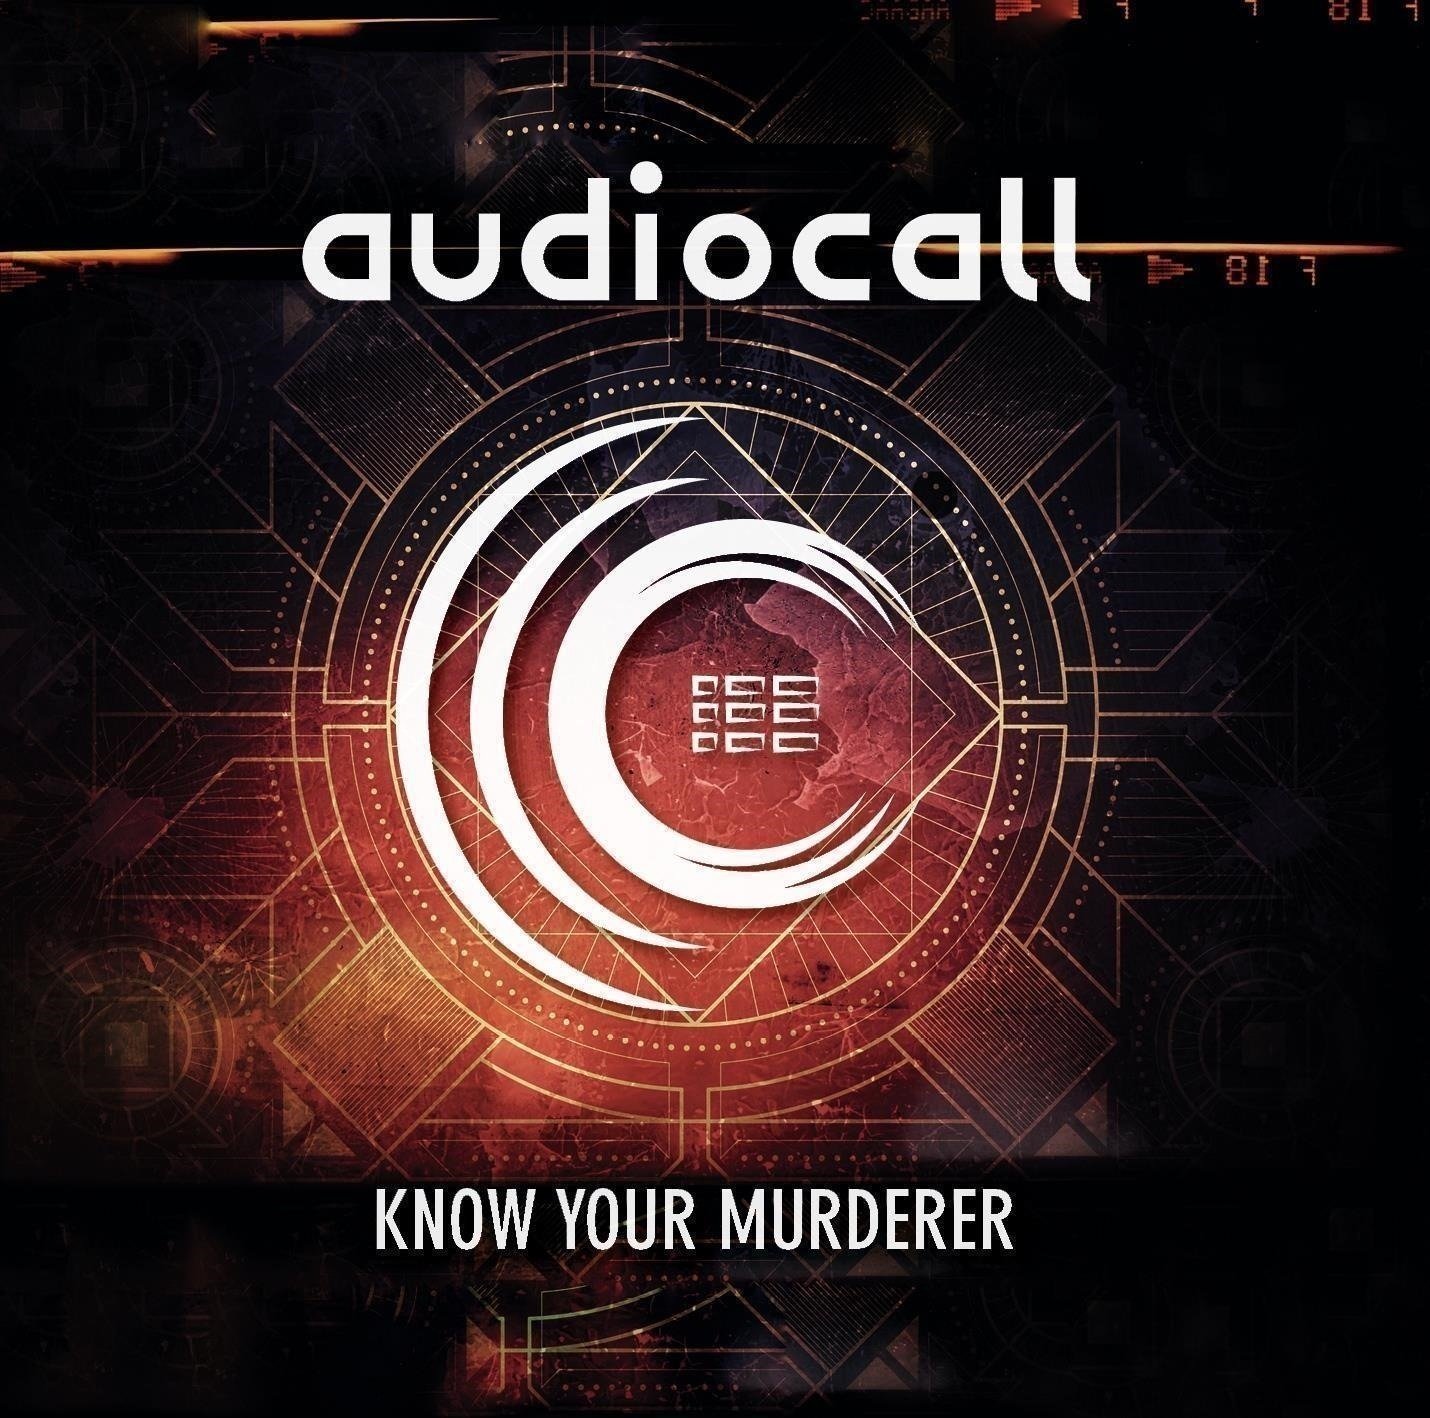 CD Shop - AUDIOCALL KNOW YOUR MURDERER